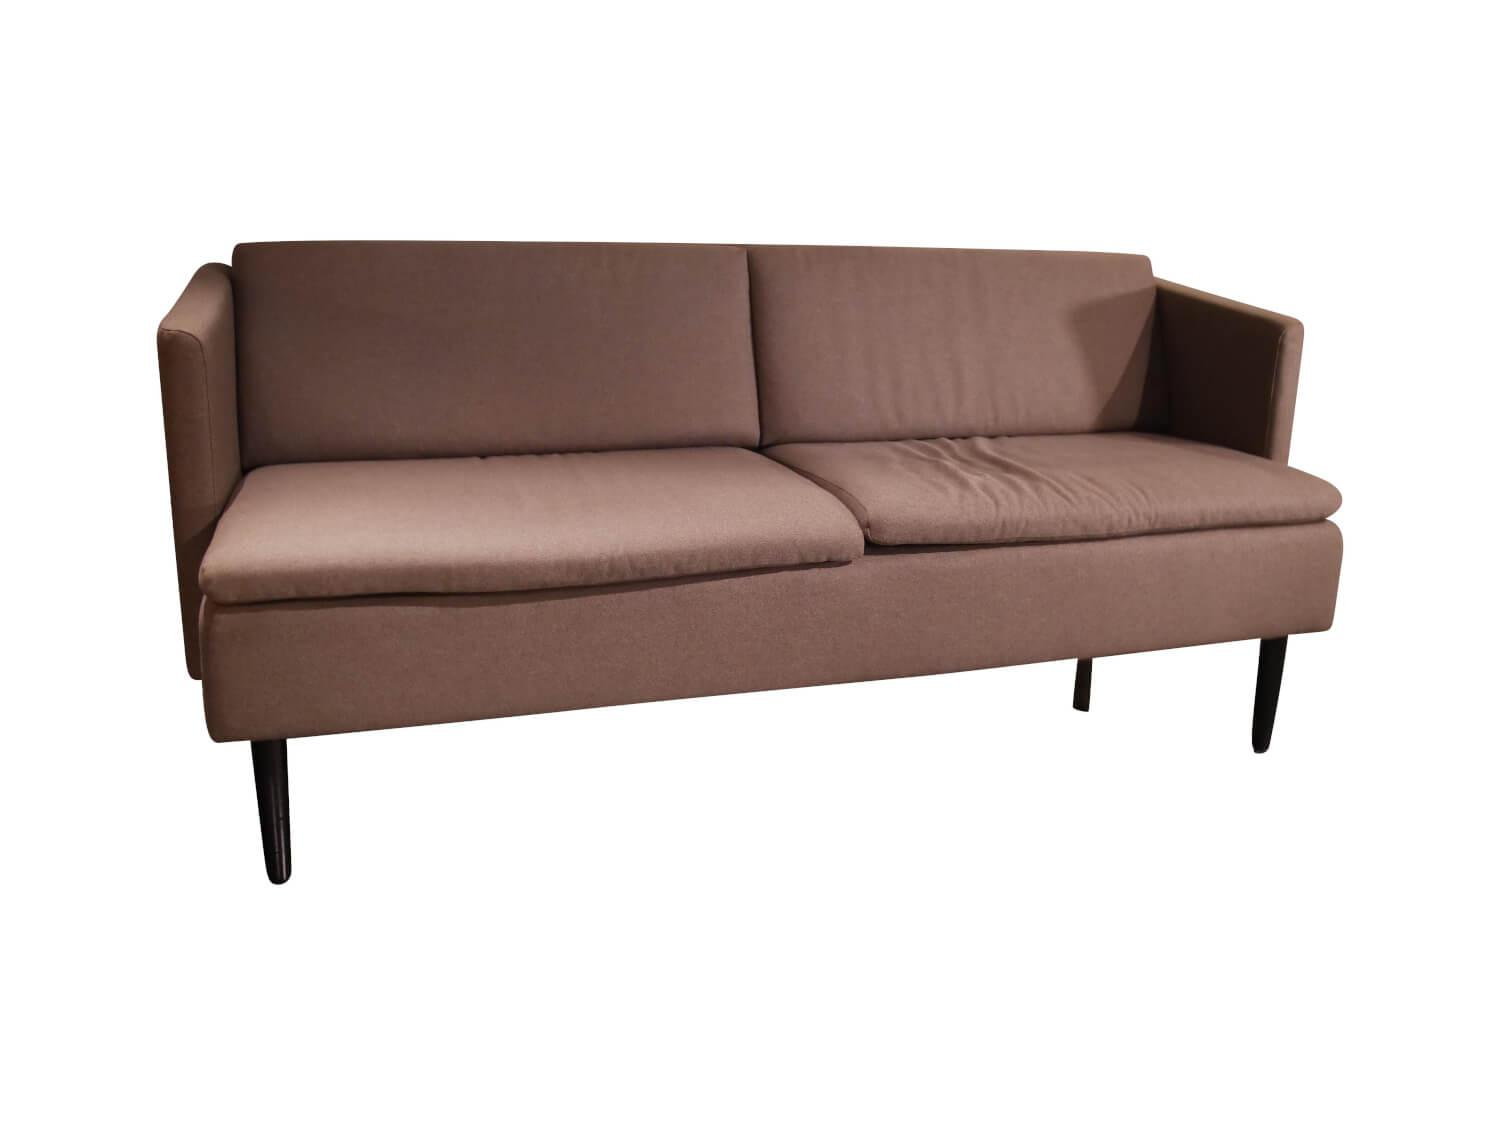 Spice 3S R 3 Sitzer Sofa Stoff Calido 579 Farbe 86 Brown PG5 Gestell 36 Black Wood